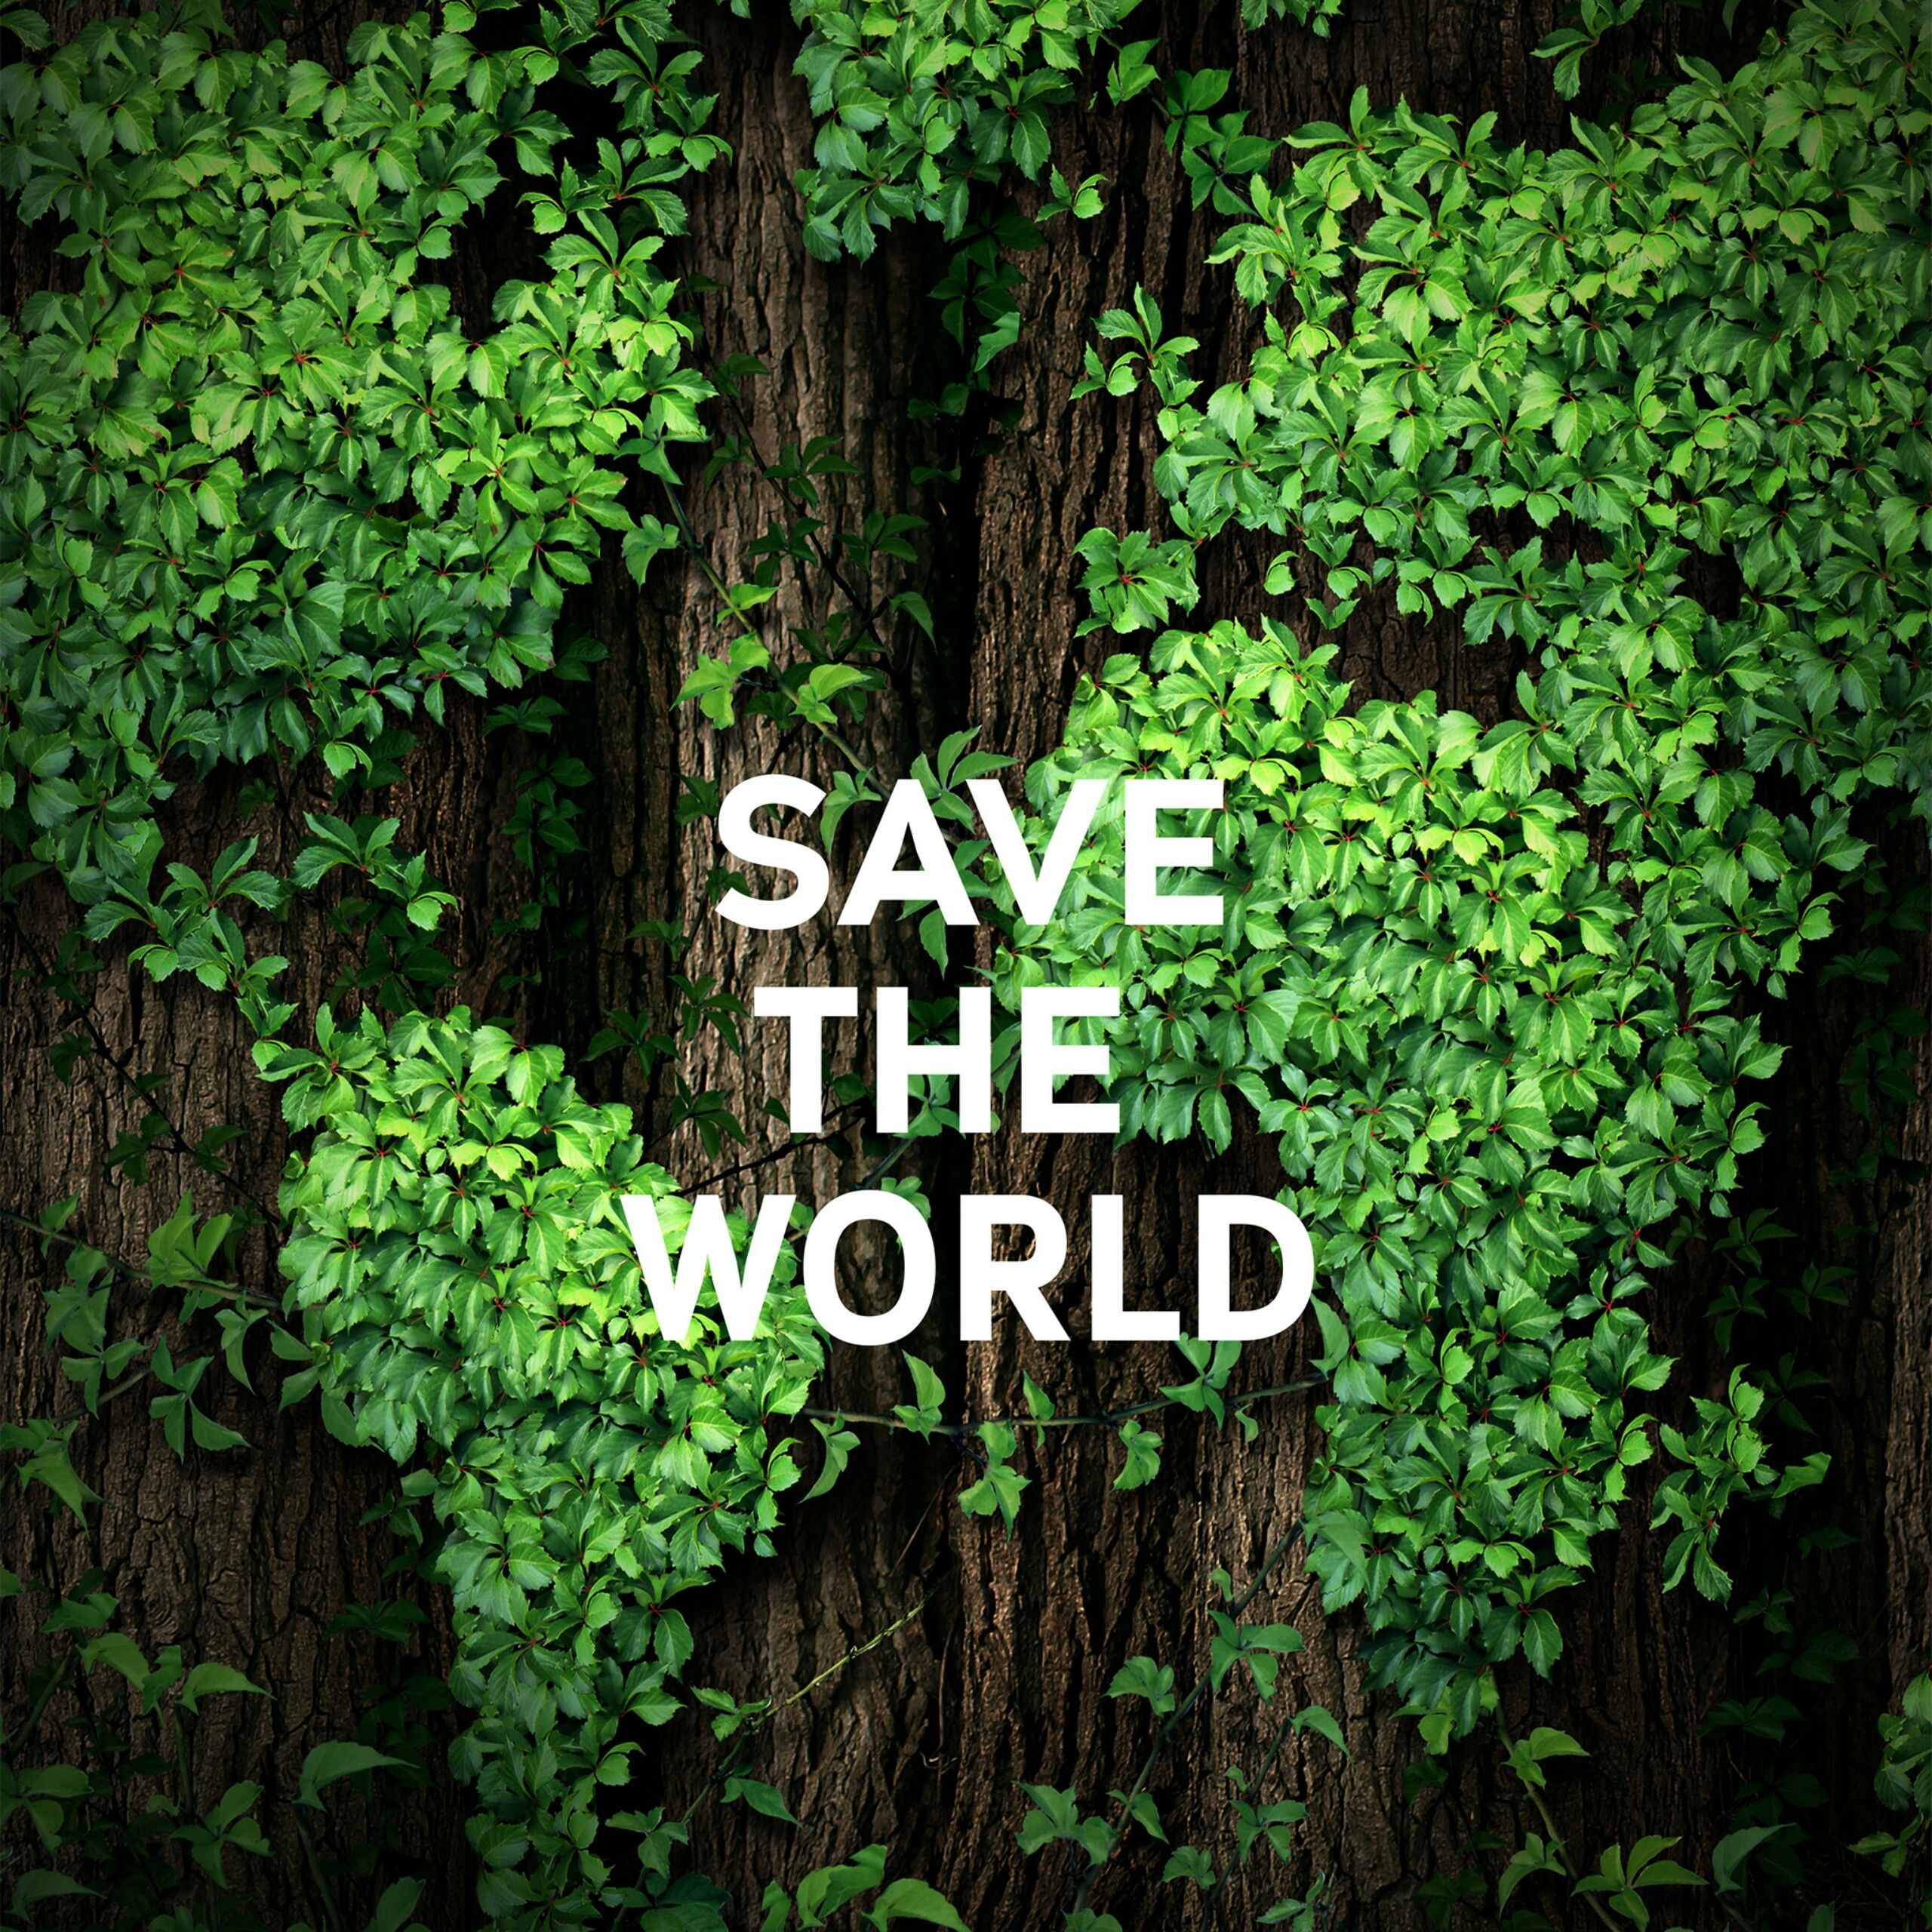 Save The World Earth Day April 22 Events QHD Wallpaper 2560x2560